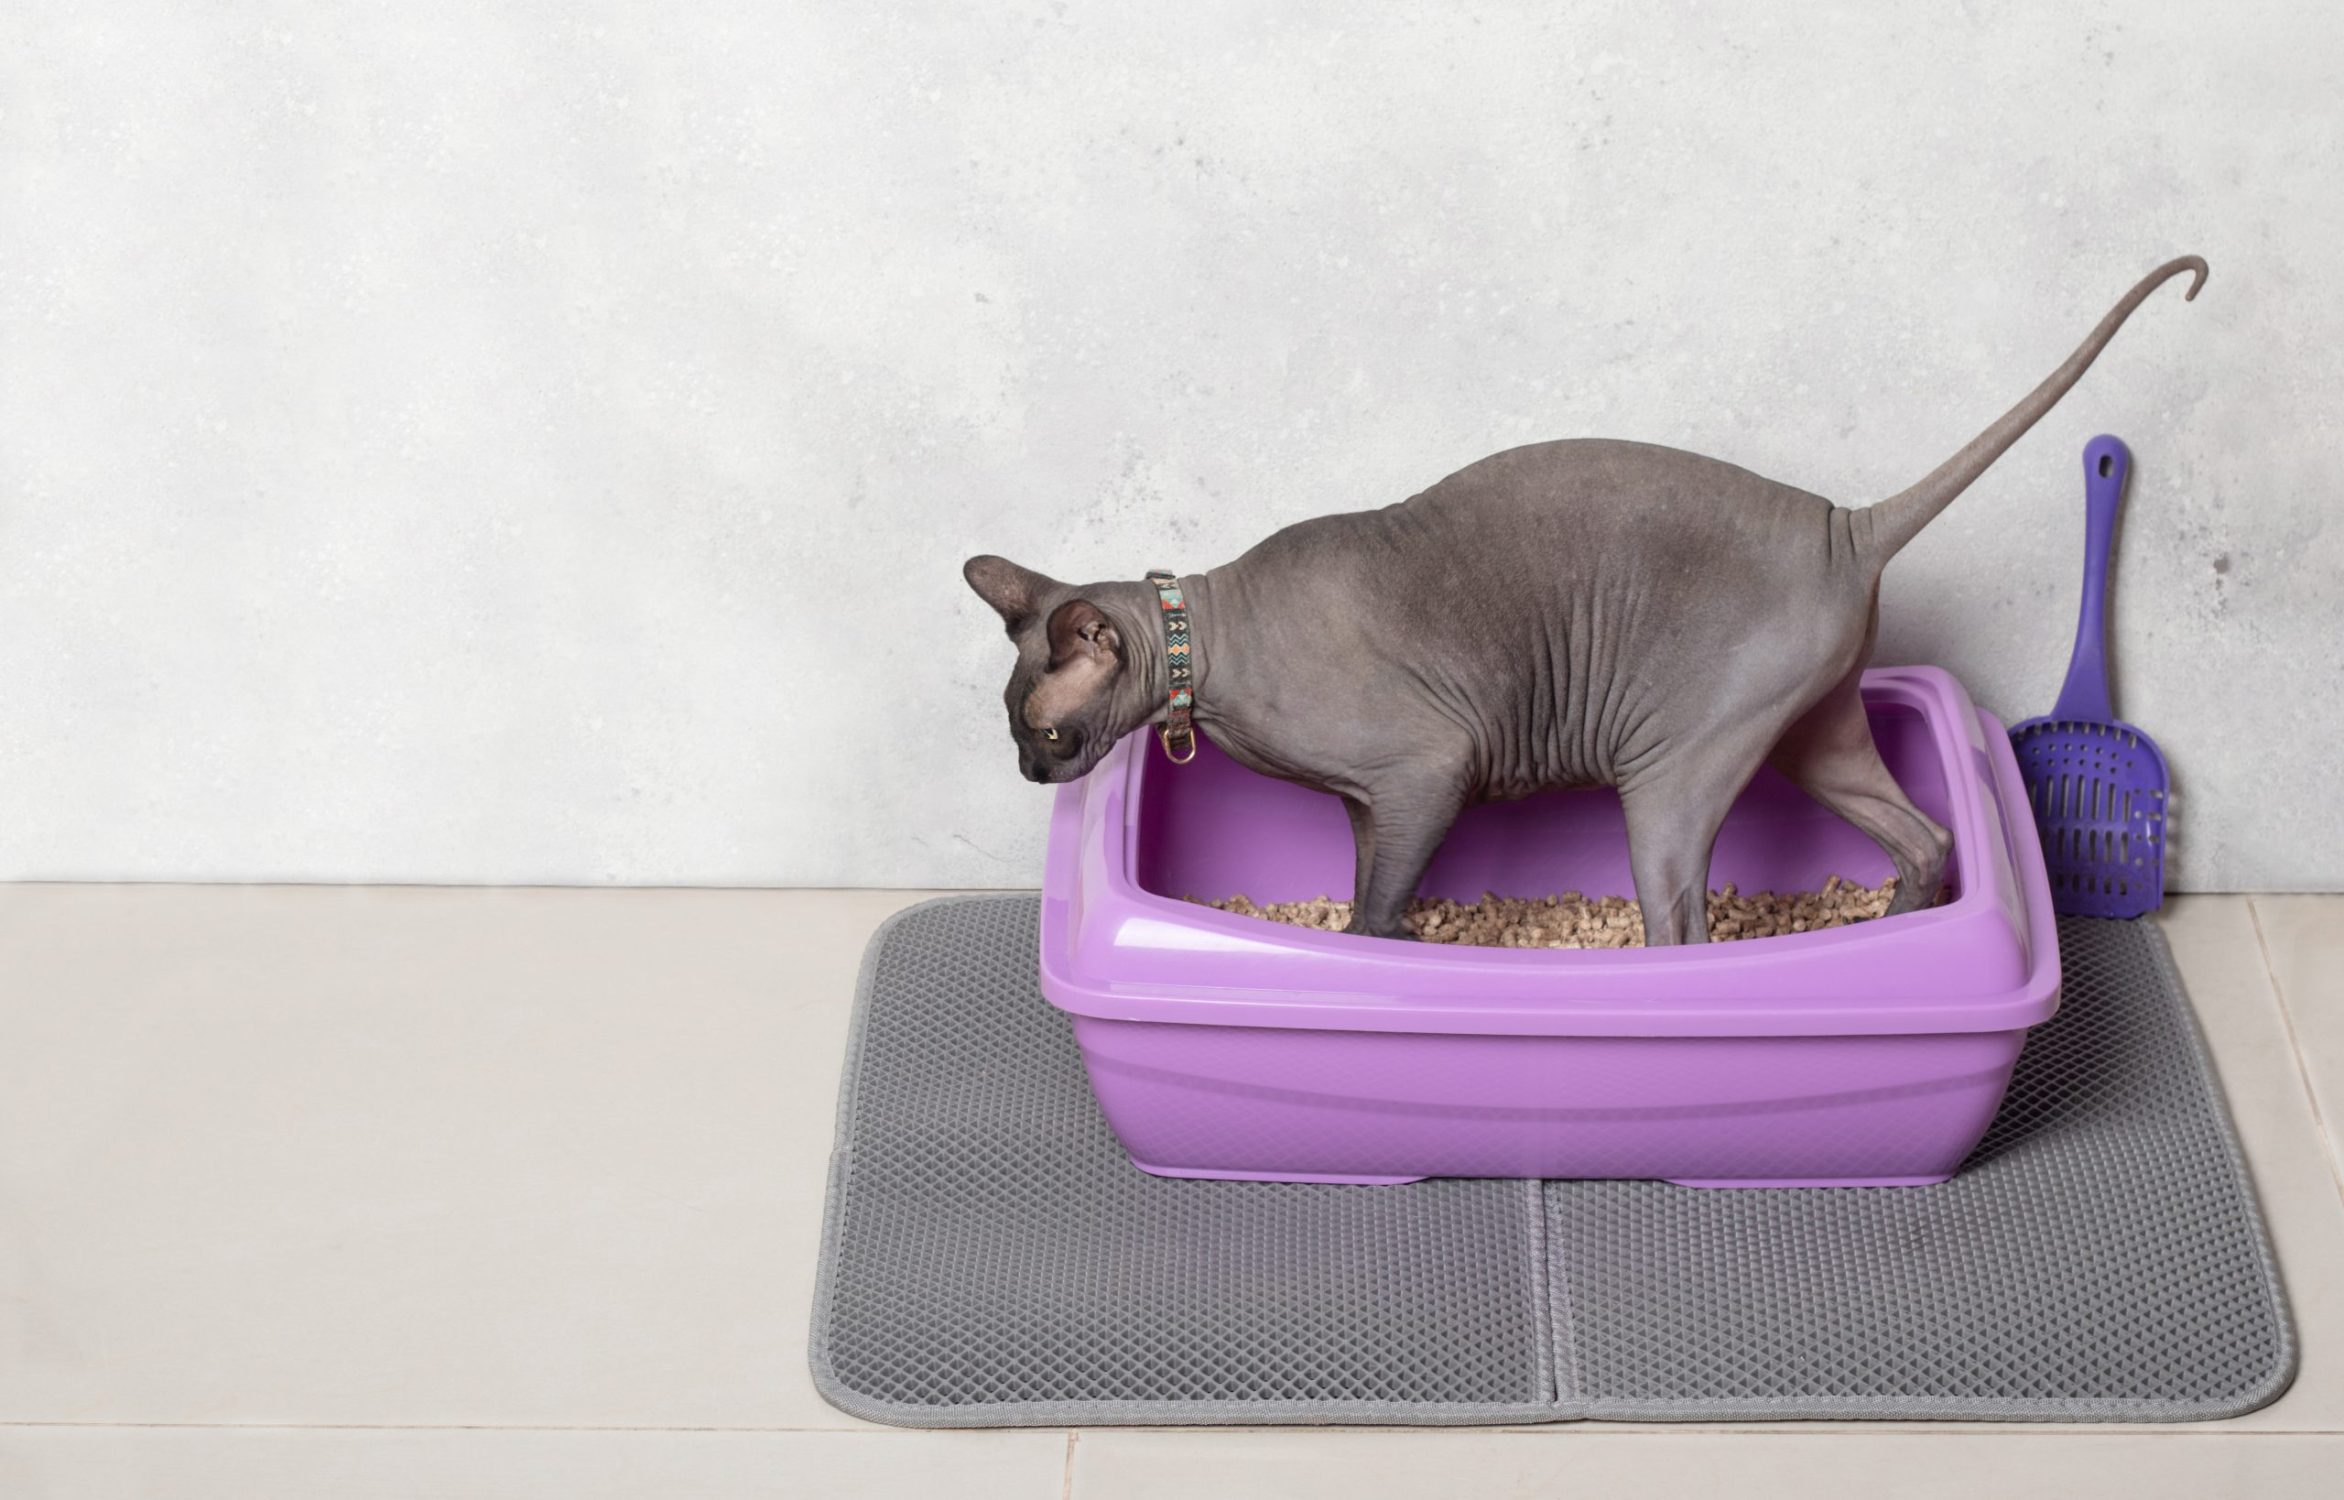 Train a Cat - Cute cat sphinx tray purple plastic and scoop on floor and waterproof mat. Toilet wood litter